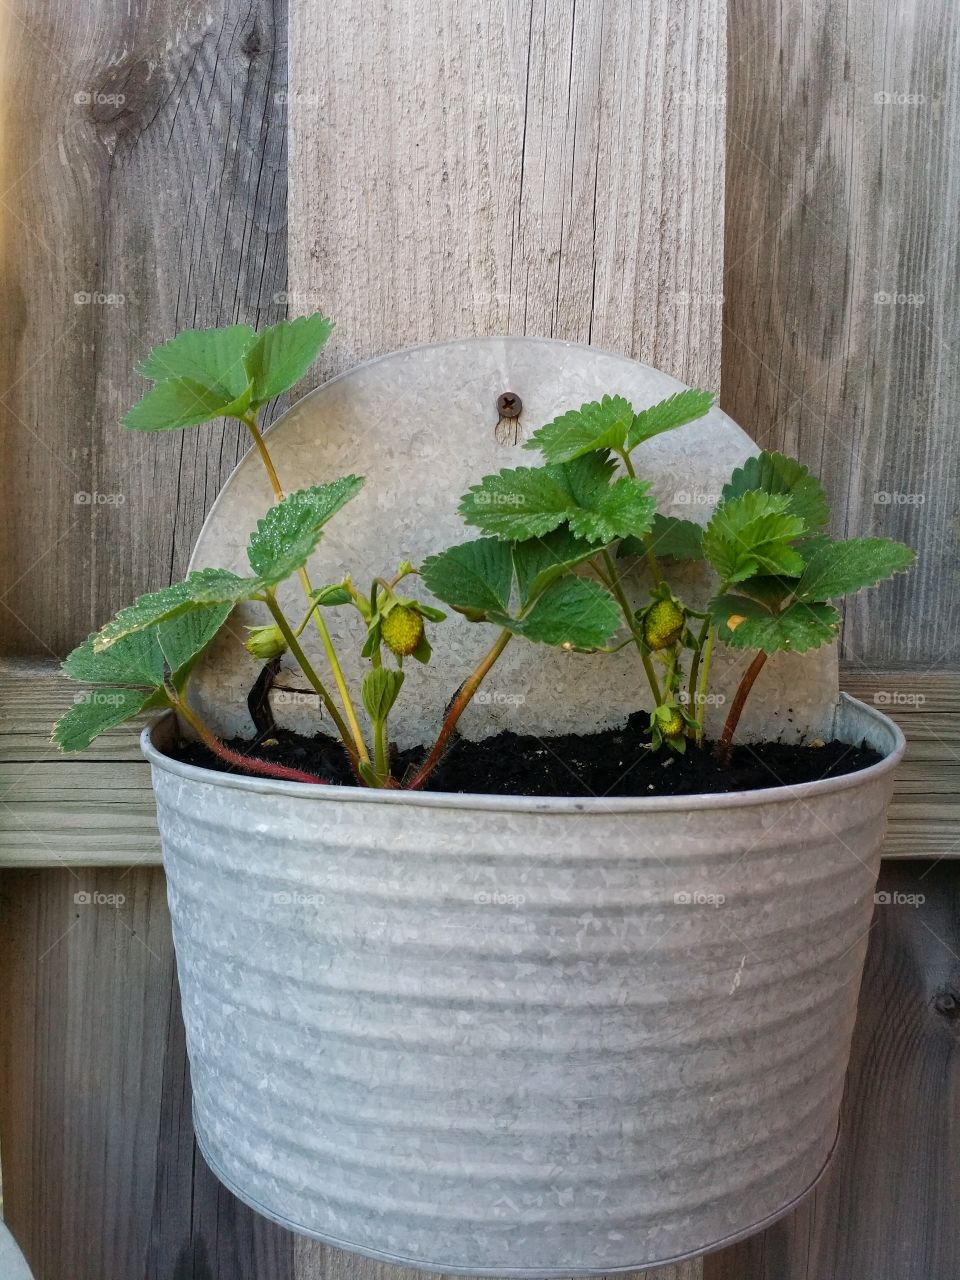 Strawberry plants in a pot hanging on a wooden wall